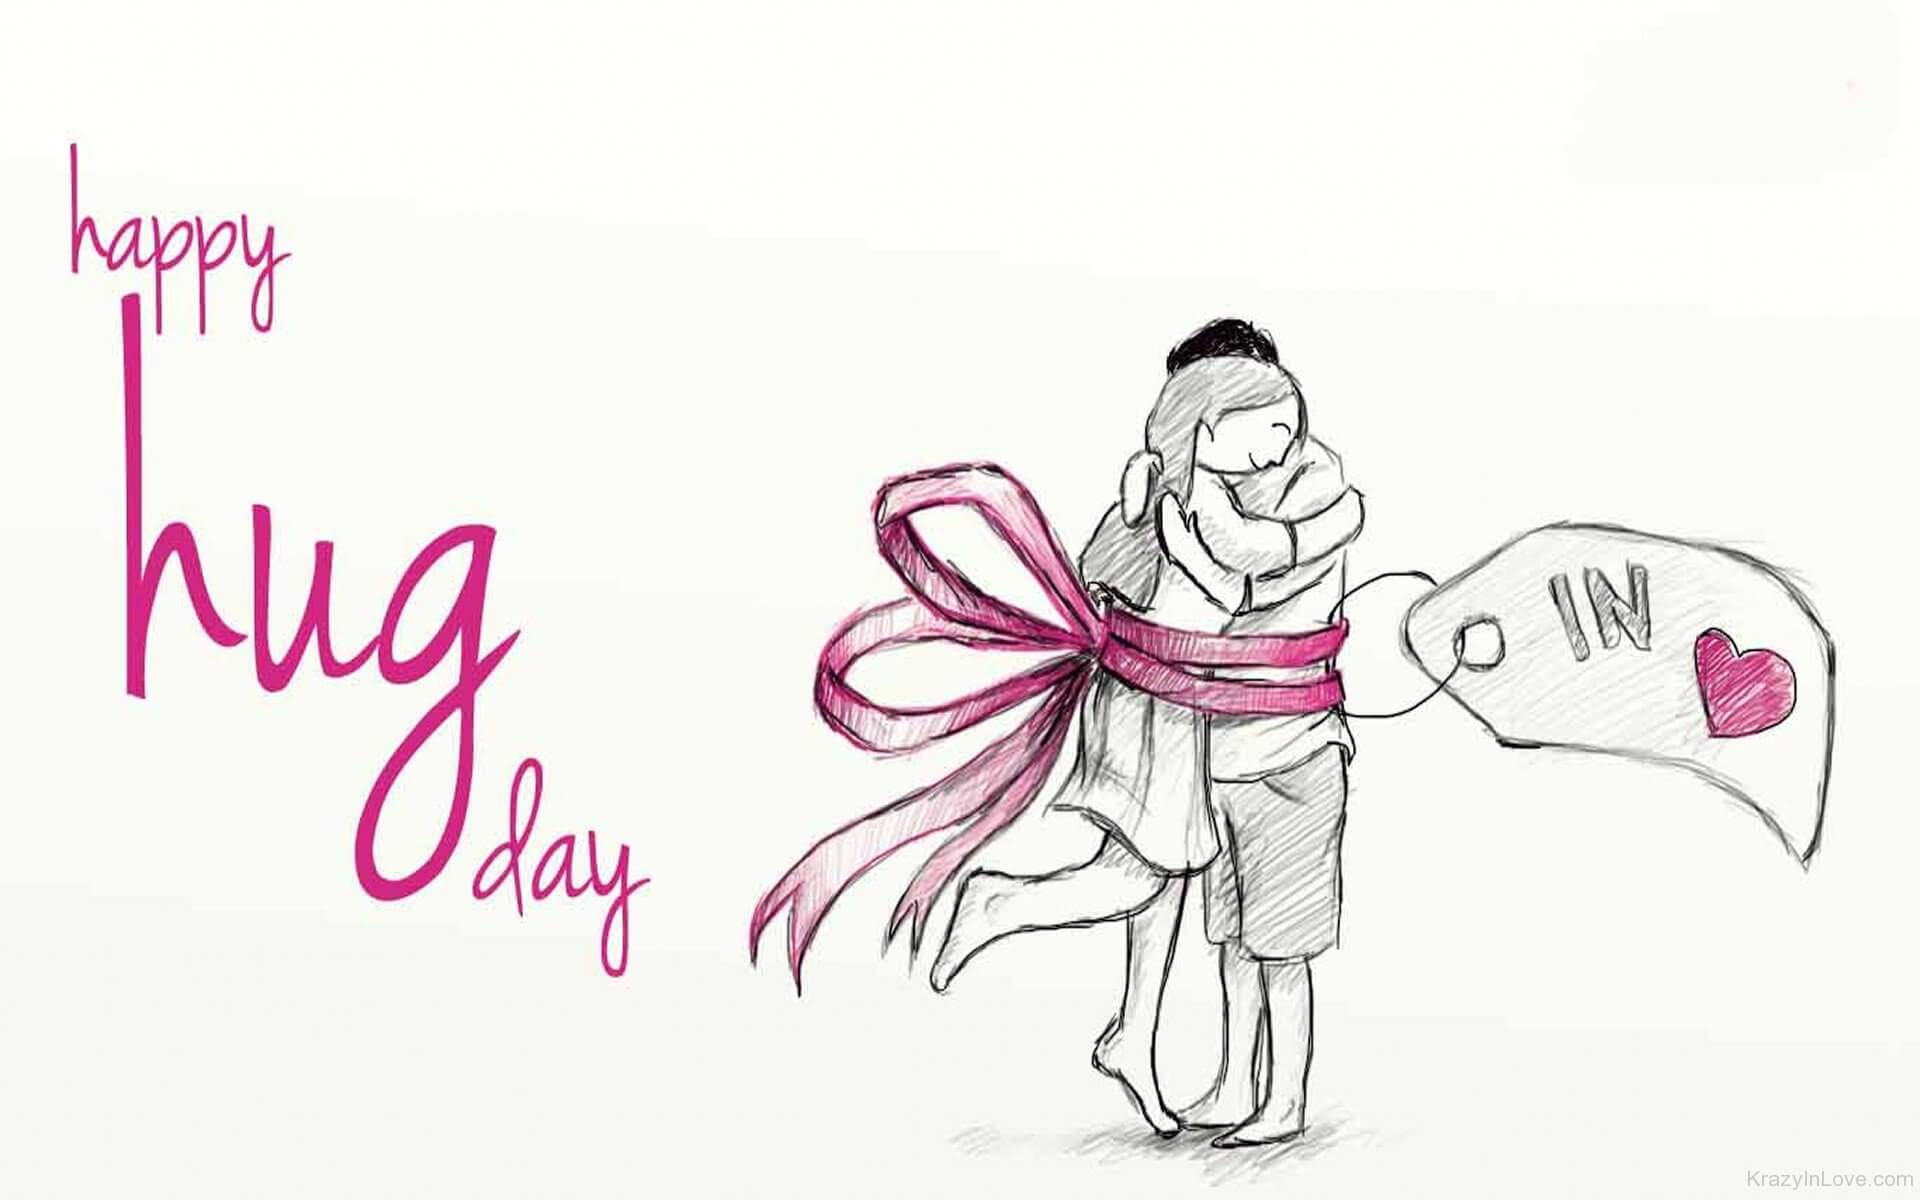 Hug Day The Sixth Step to Love Week – Messages and Quotes